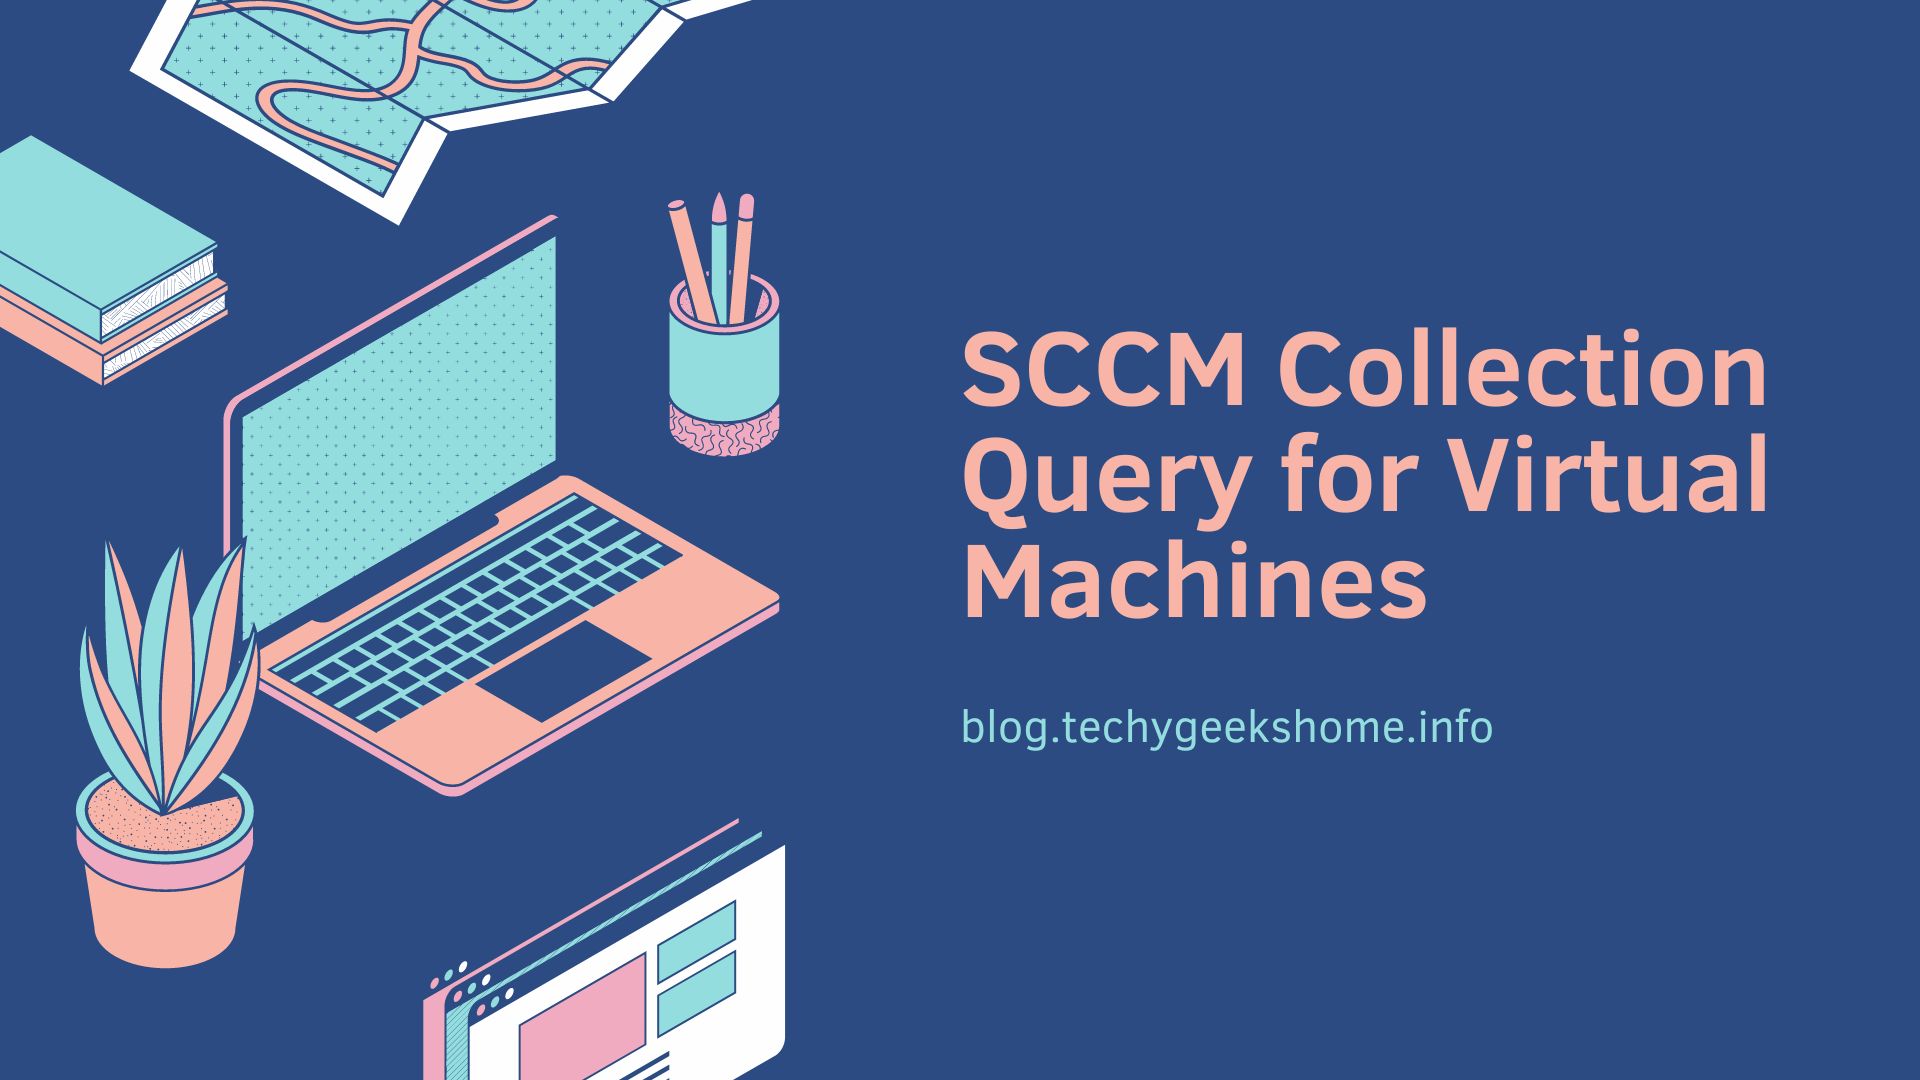 SCCM Collection Query for Virtual Machines